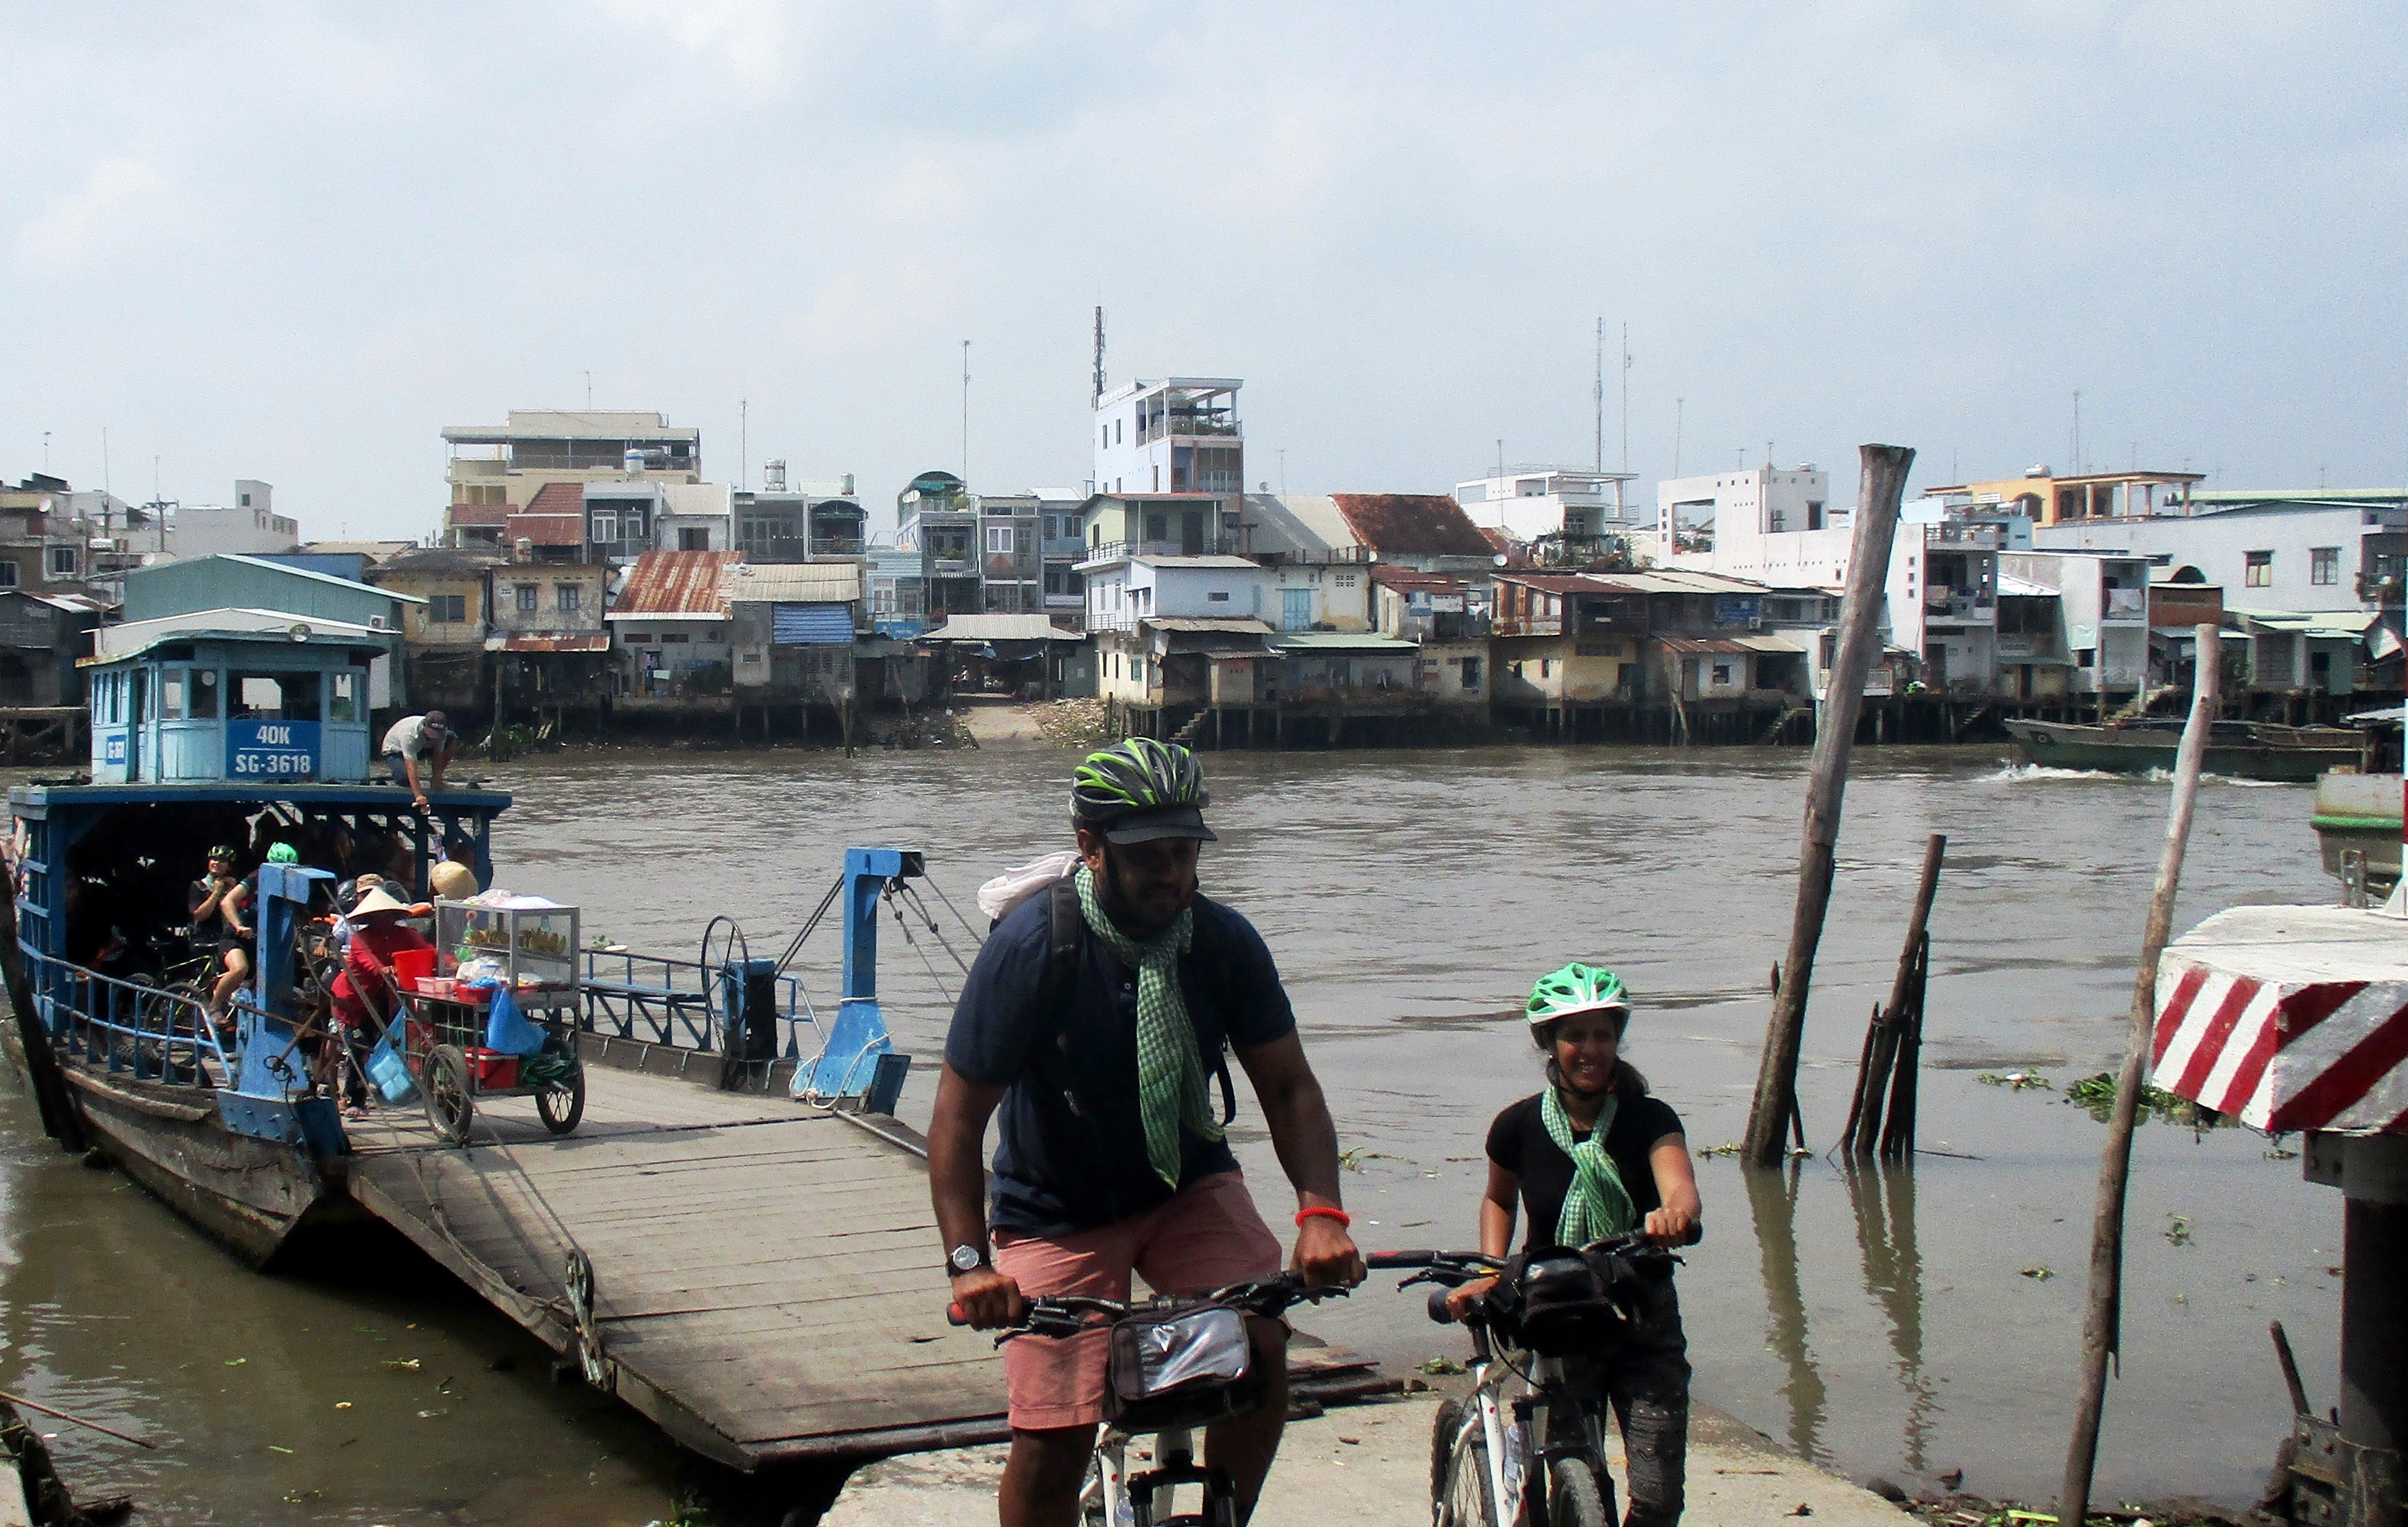 EXPERIENCE MEKONG DELTA BY KAYAK & BIKE FULL DAY ACTIVITIES